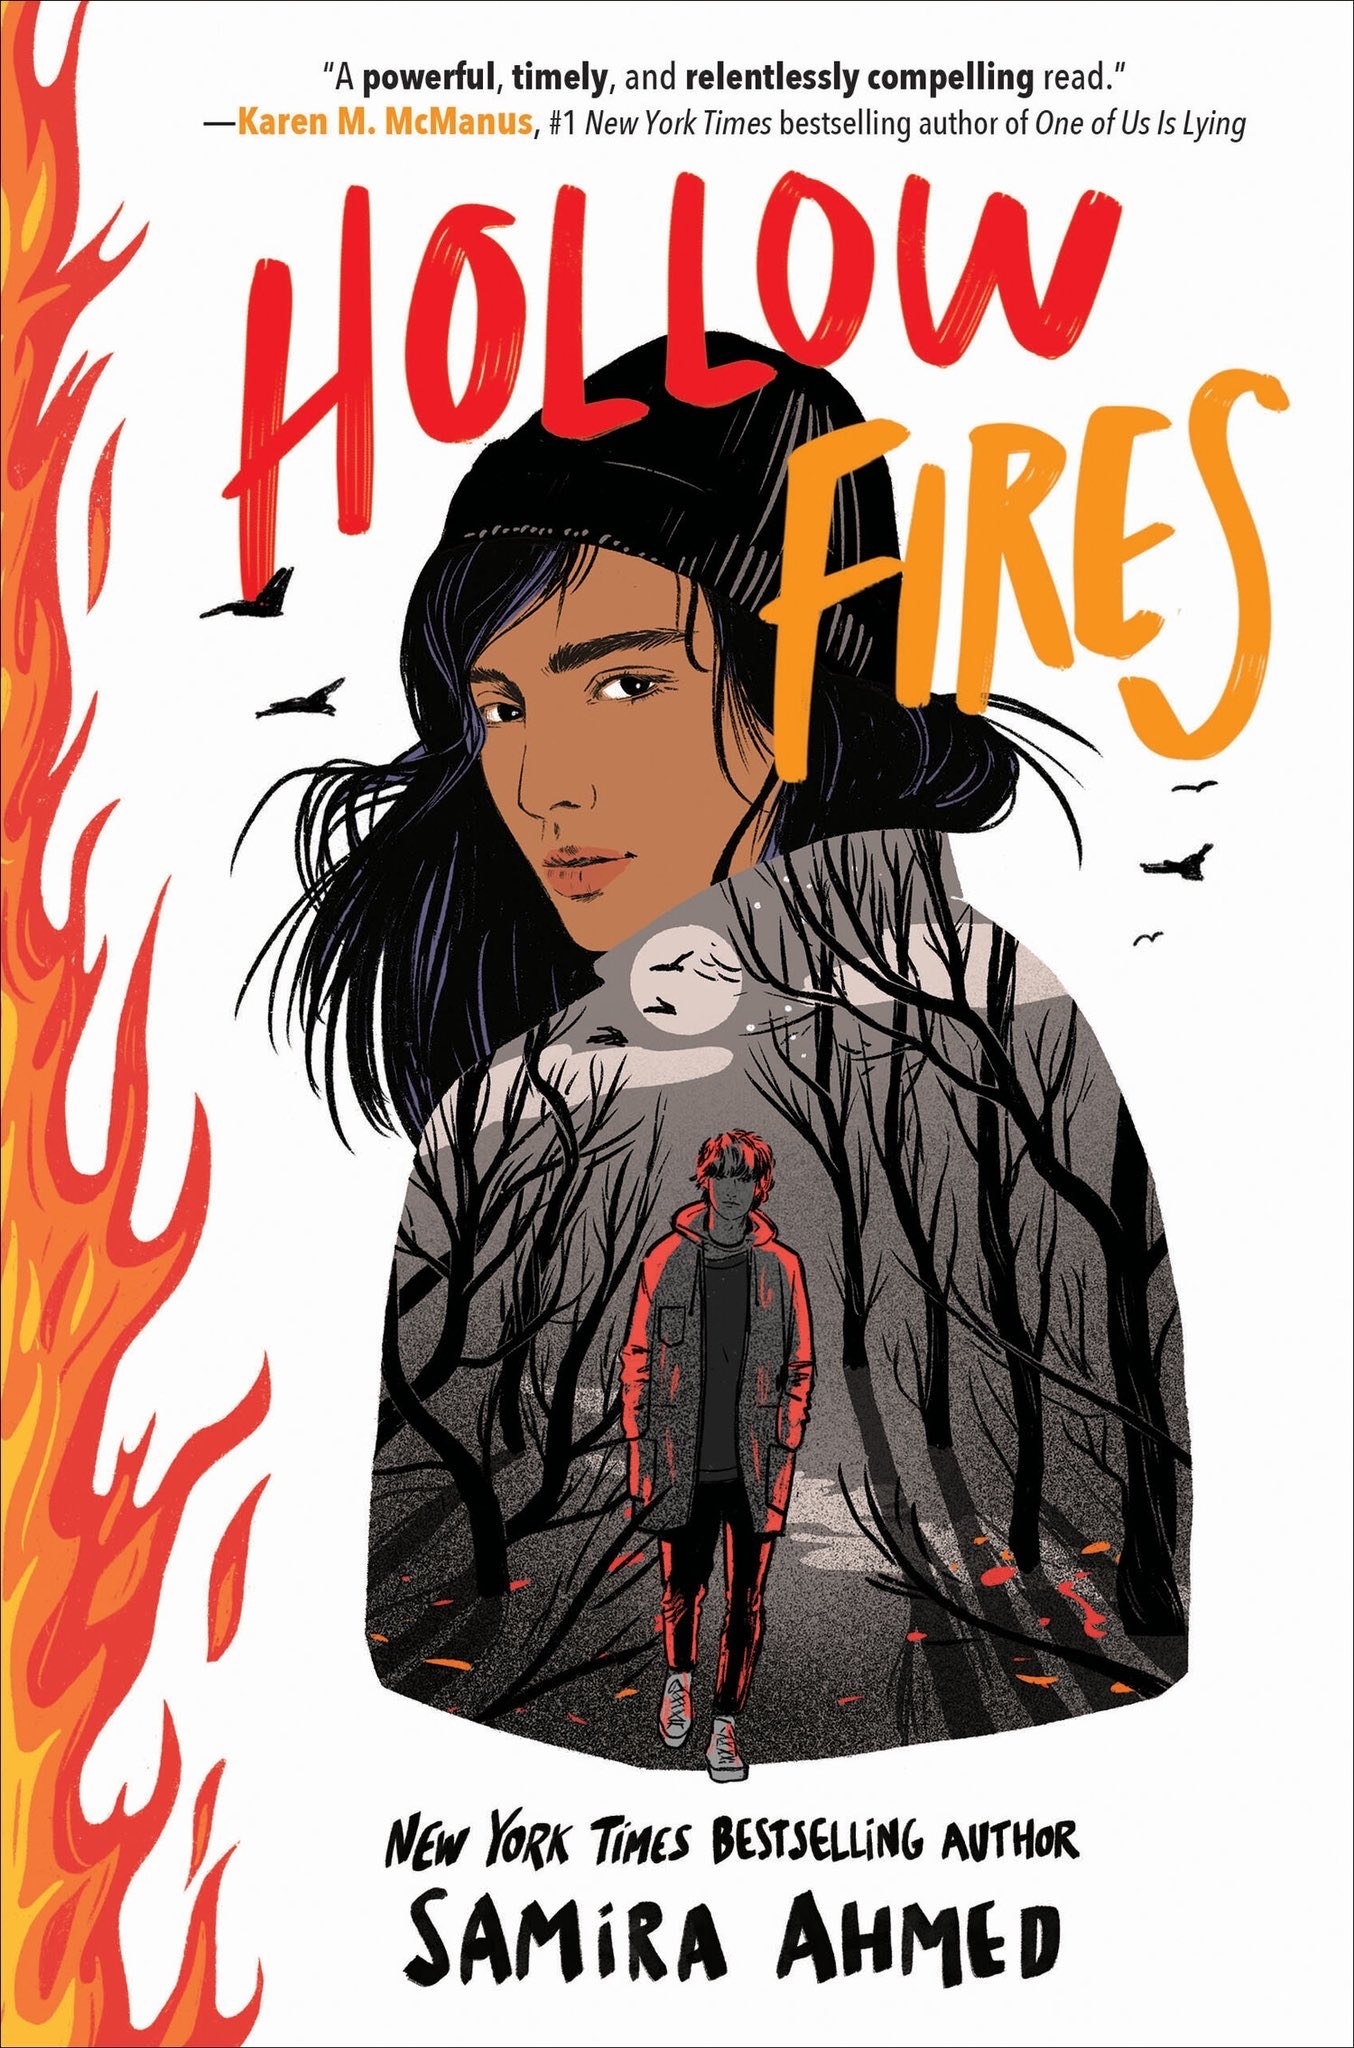 &quot;Hollow Fires&quot; cover illustration showing flames, a young woman looking behind her shoulder, and a guy in the woods at night